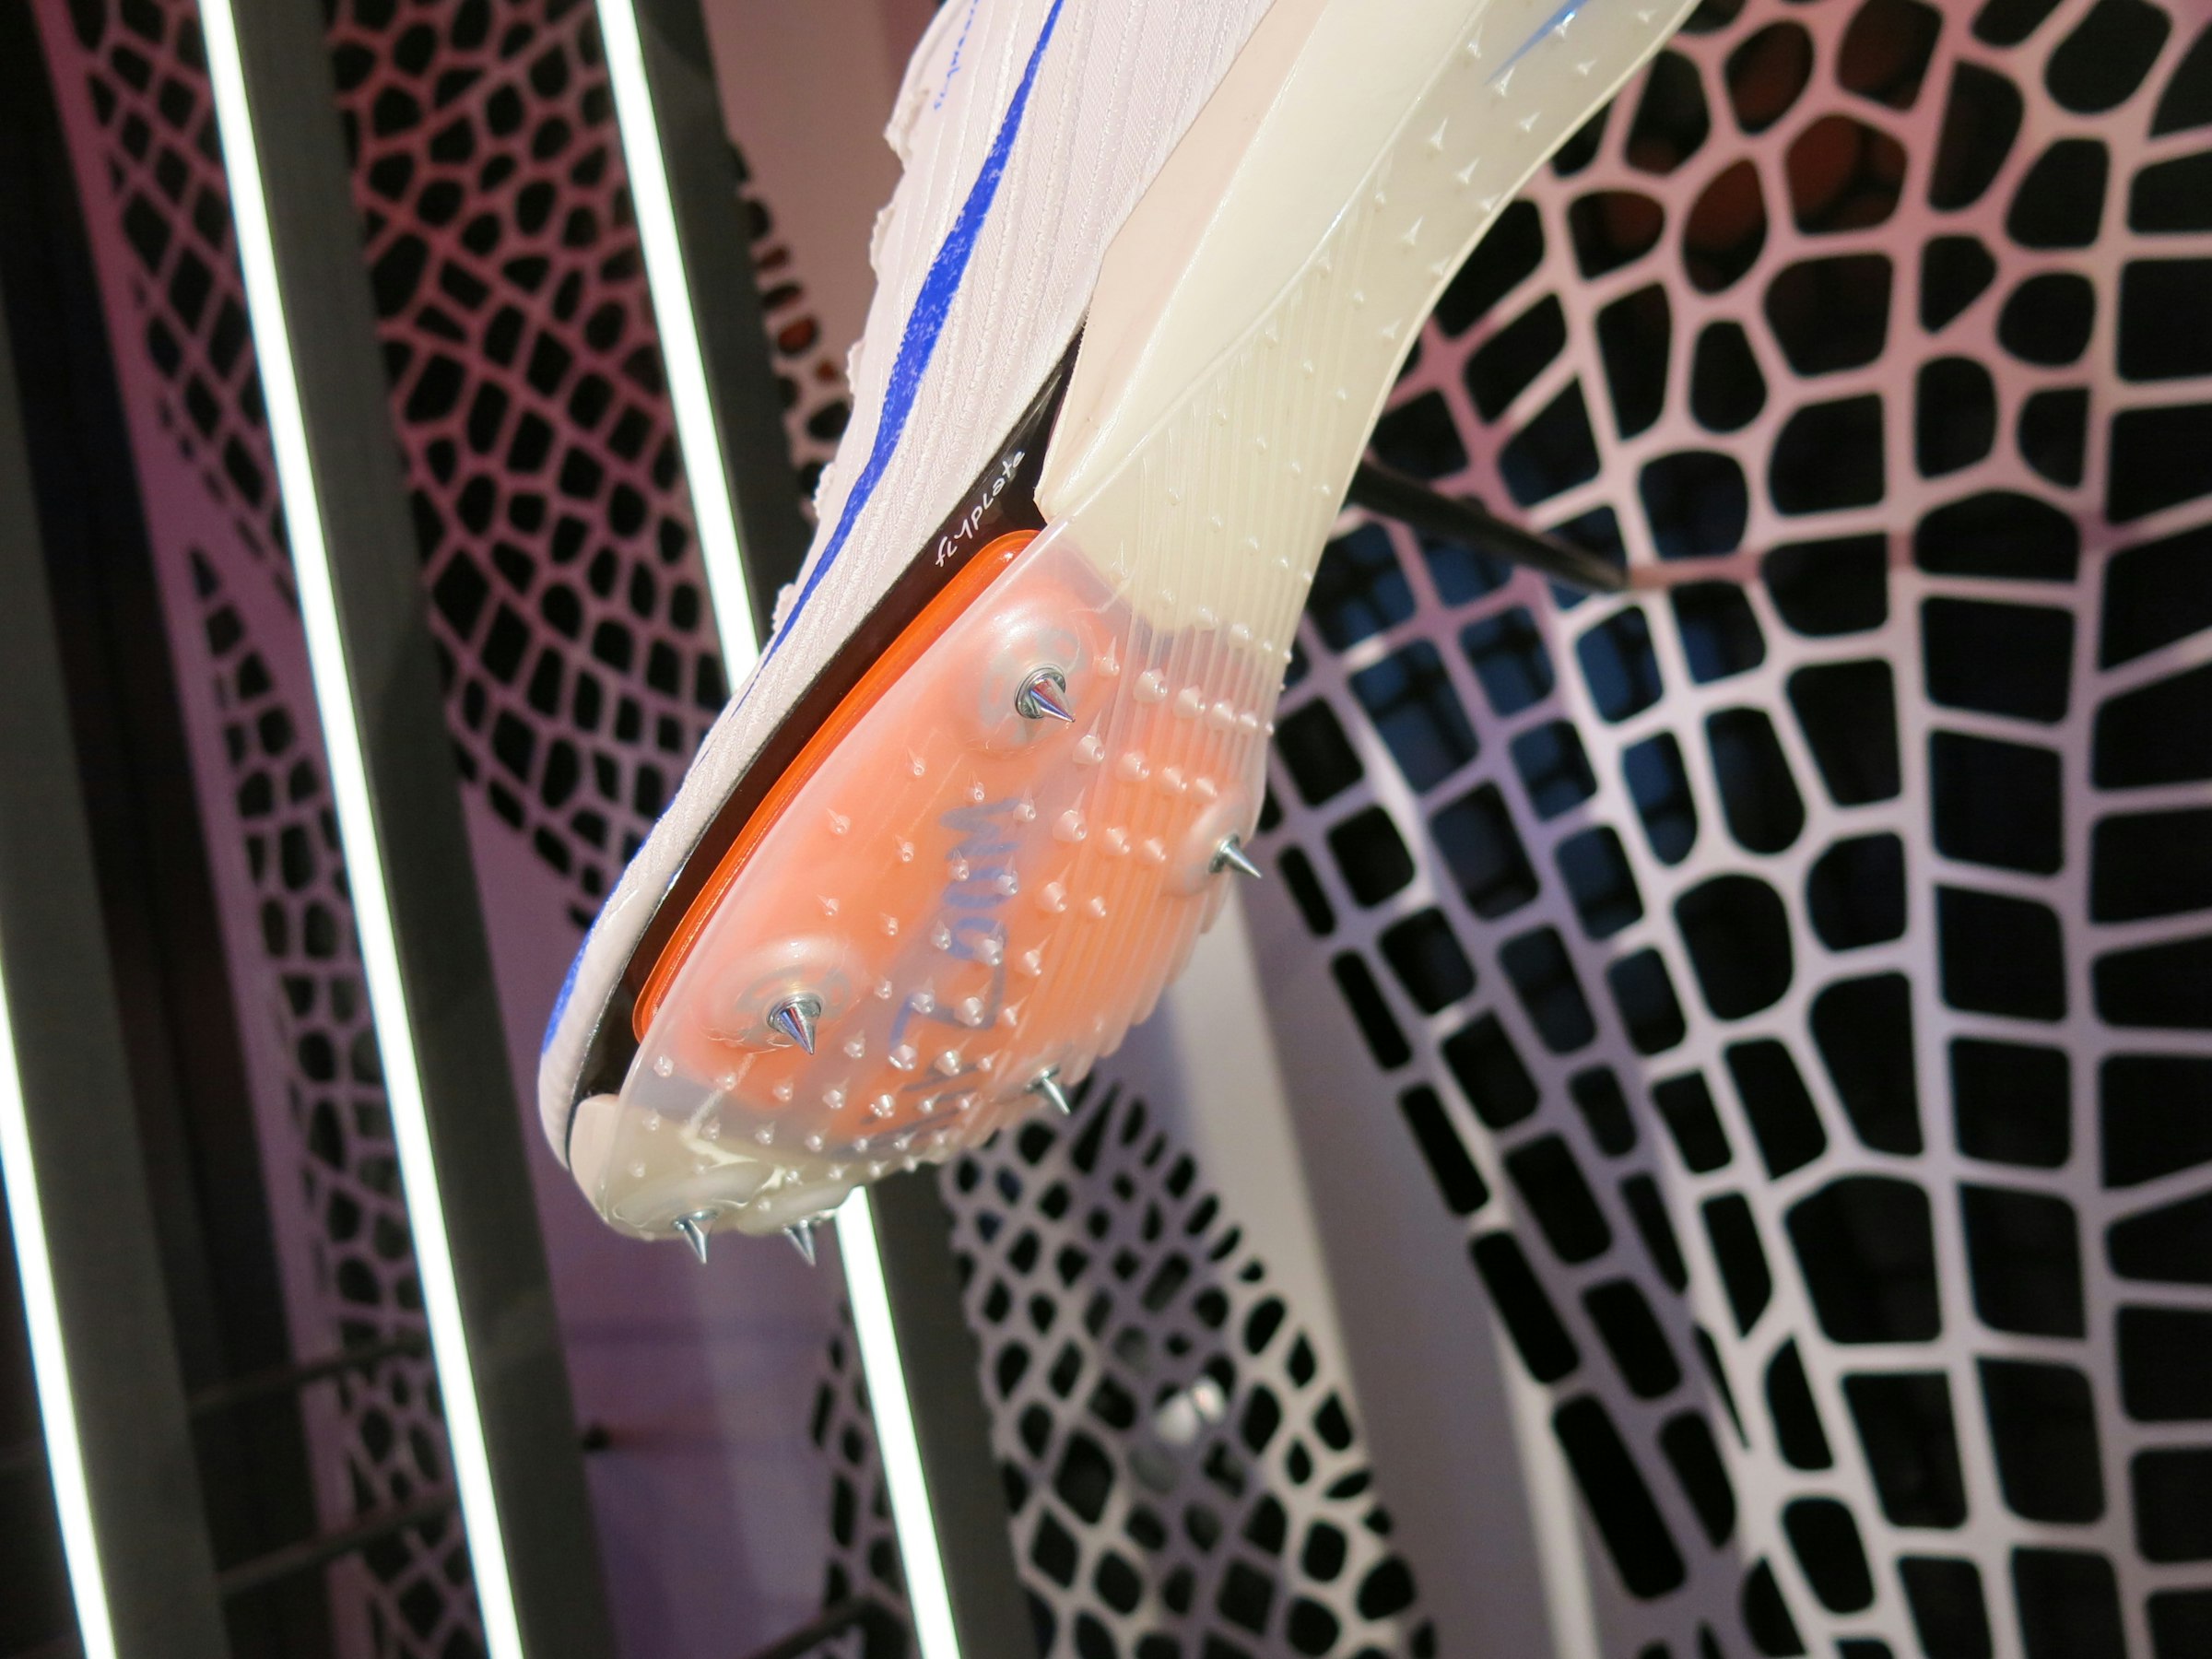 A notable clear outsole plate. The Air Zoom Unit stands out